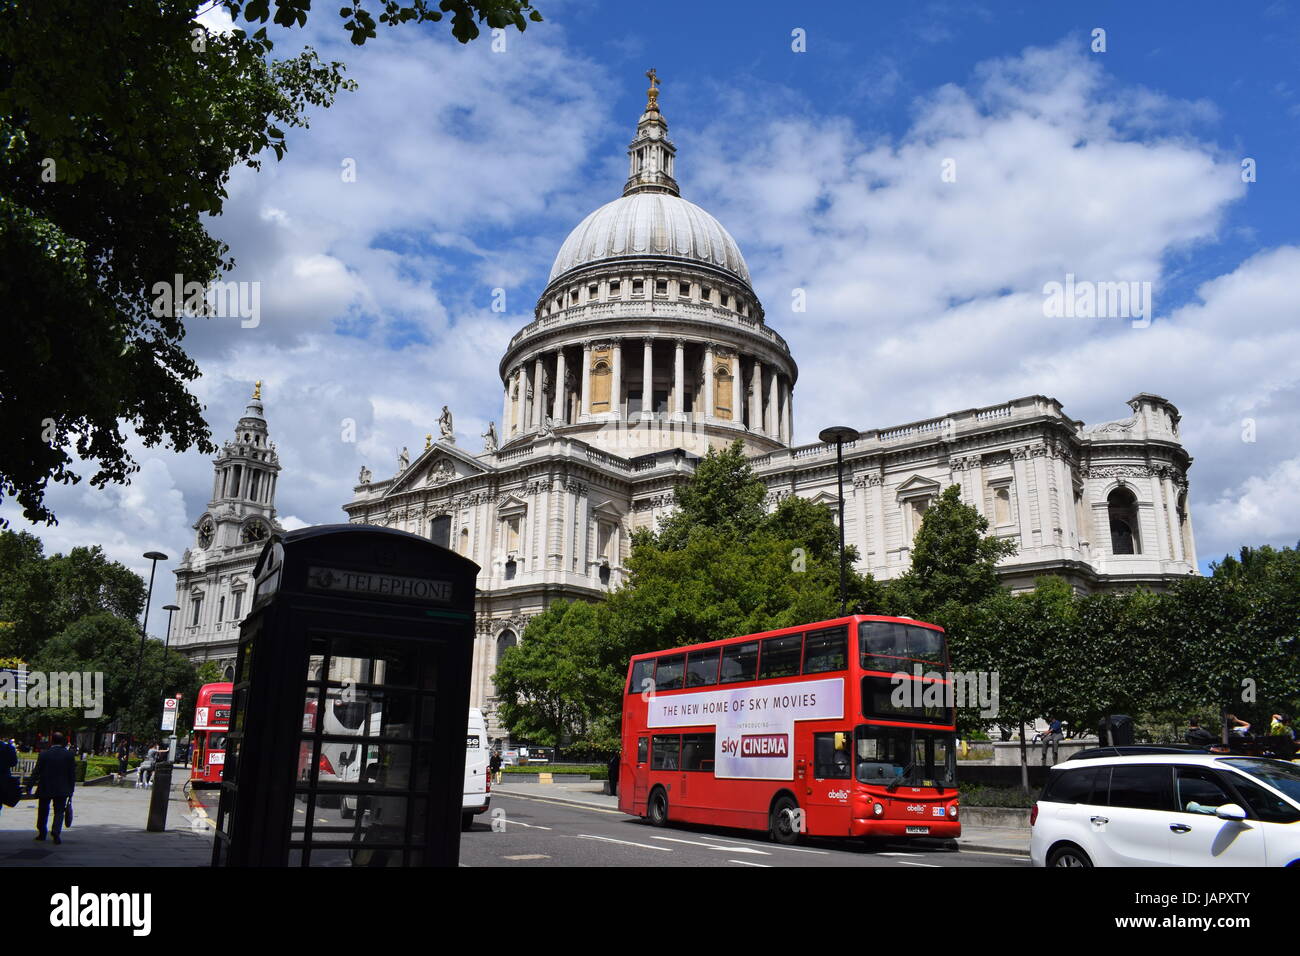 St. Pauls Cathedral 2016 Stockfoto